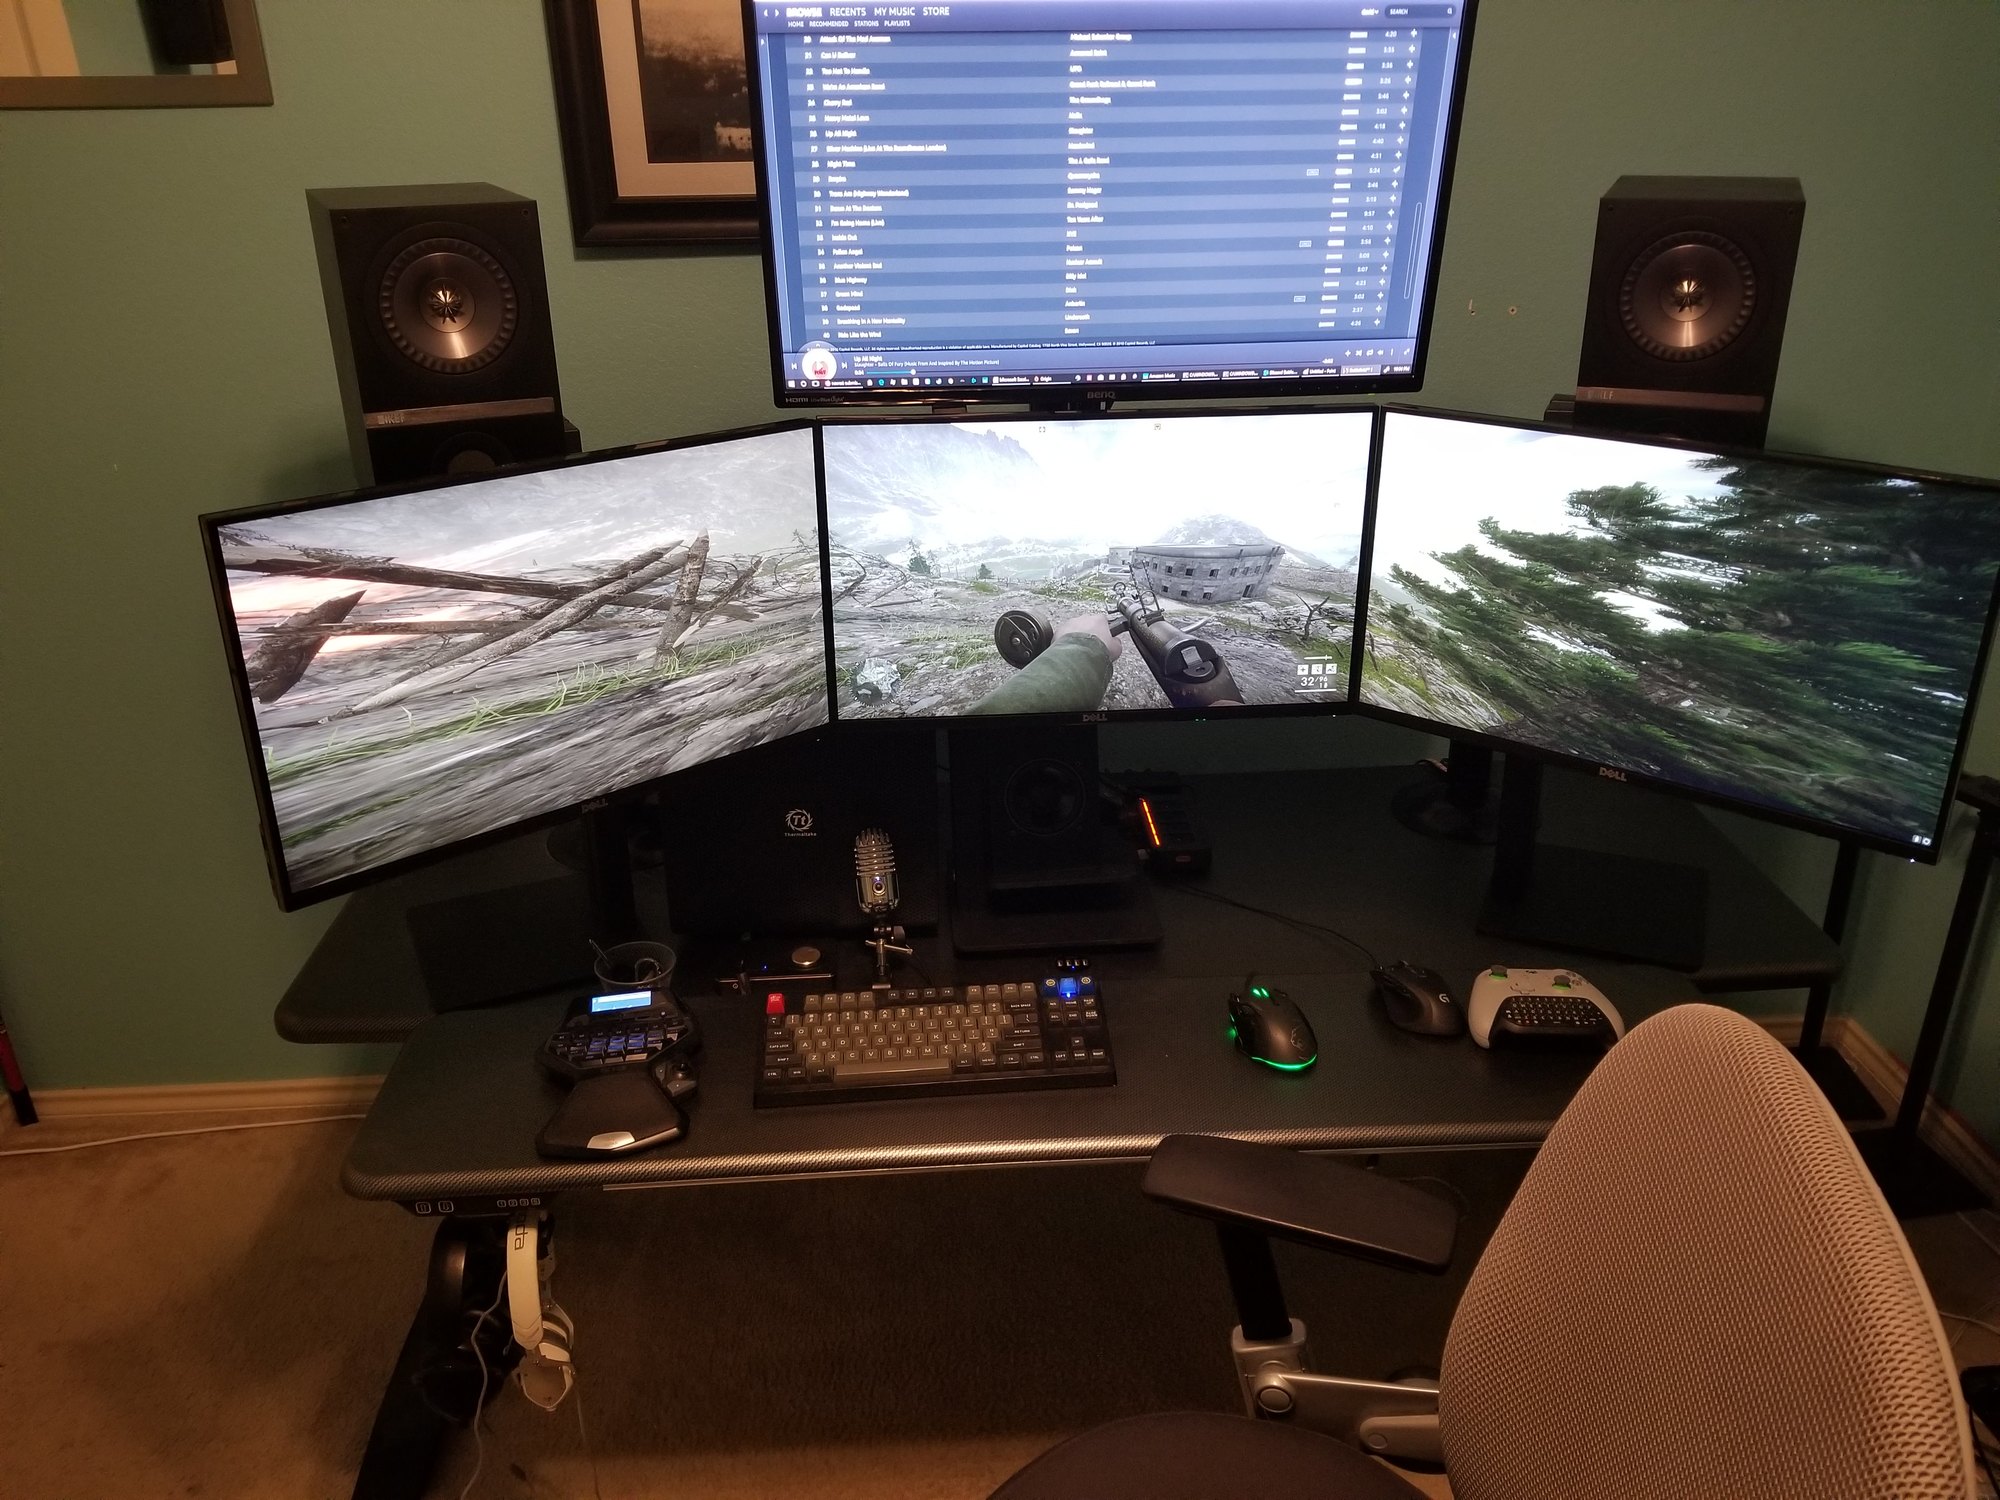 Triple Screen Or One Large One For Gaming H Ard Forum